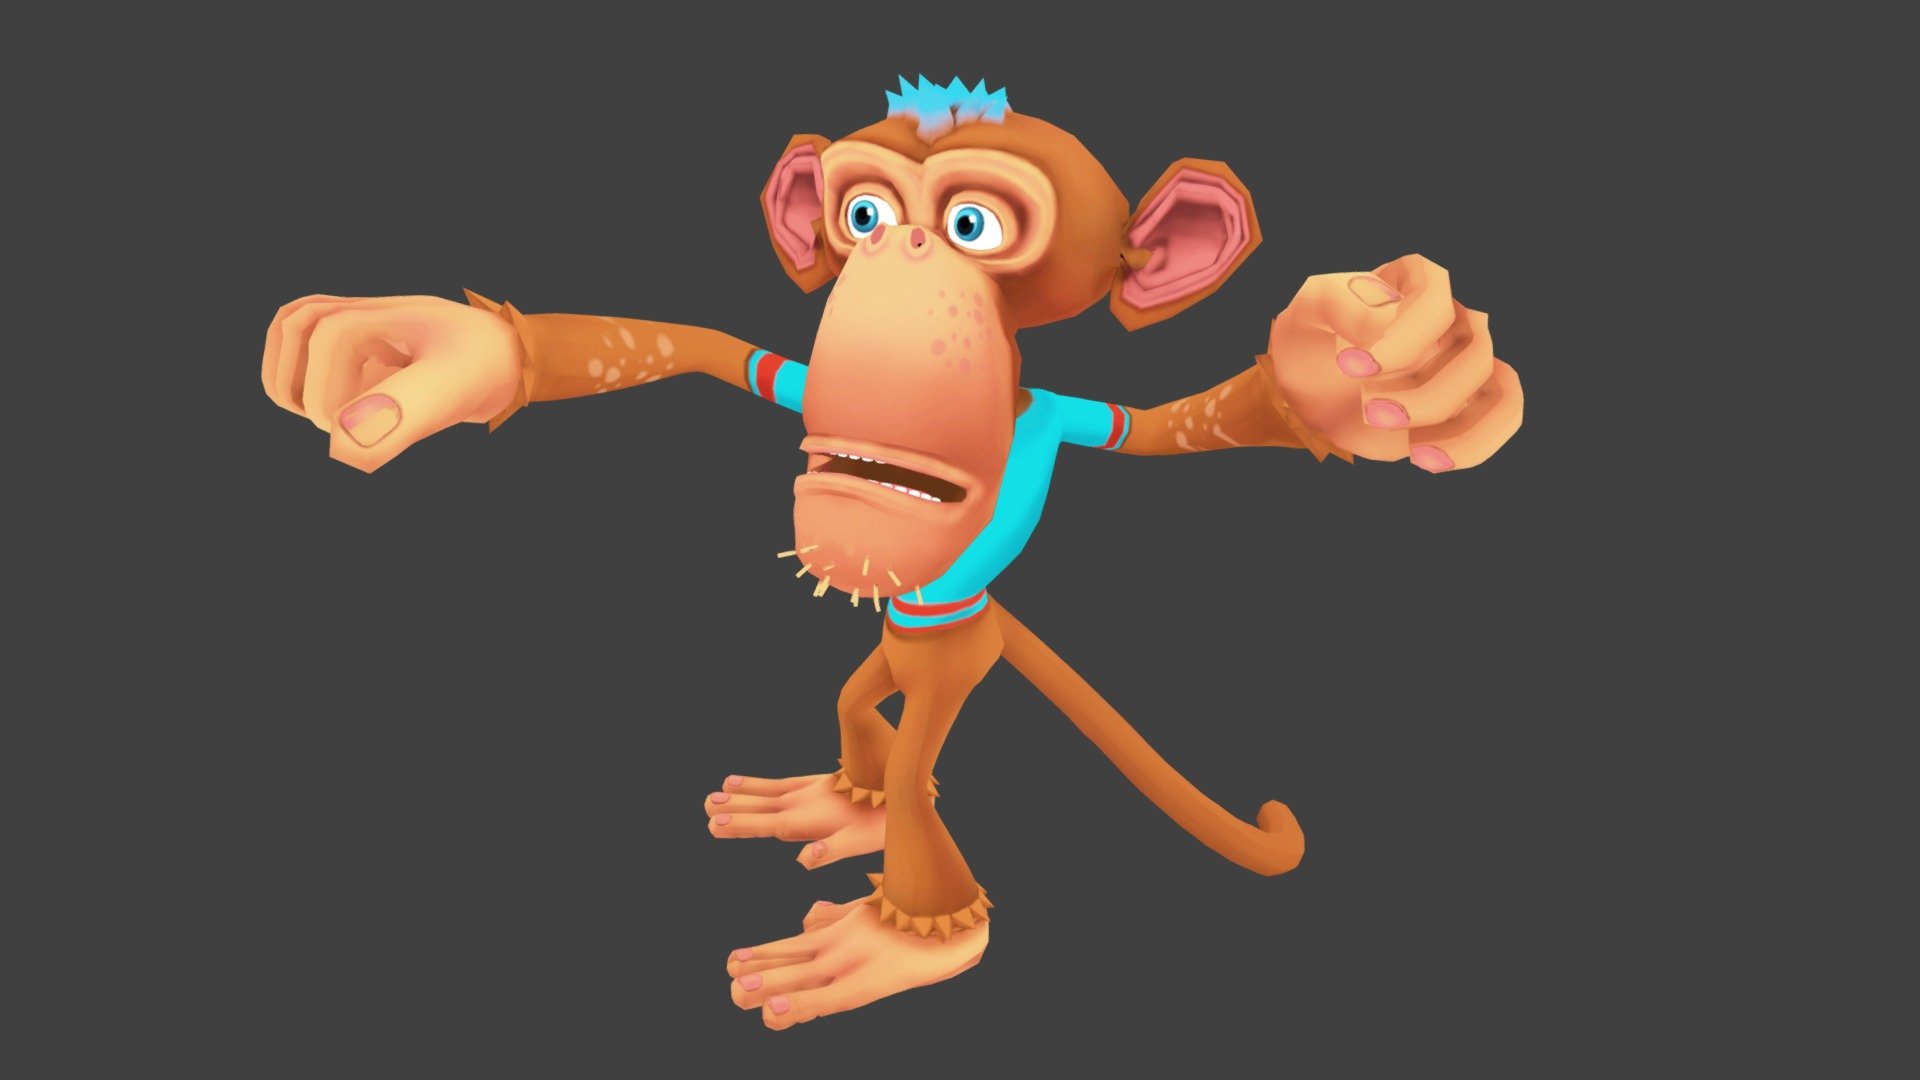 Monkey character for games and animations. The model is game ready and compatible with game engines.

The model is low poly with four texture resolutions 4096x4096, 2048x2048, 1024x1024 &amp; 512x512.

Included Files:


Maya (.ma, .mb) - 2015 - 2019
FBX - 2014 - 2019
OBJ

The package includes 18 Animations which are as follows:


Run
Jump
Leap right
Leap left
Skidding
Roll
Crash &amp; death
Bike ride &amp; fall
Look behind &amp; challenge

The model is fully rigged and can be easily animated in case further animating or modification is required.

The model is game ready at:


14,966 Polygons
14,455 Vertices

The model is UV mapped with non-overlapping UV's. The shadows and lights are baked in the texture, although you can add more lights and shadows for rendering and use it as you please 3d model